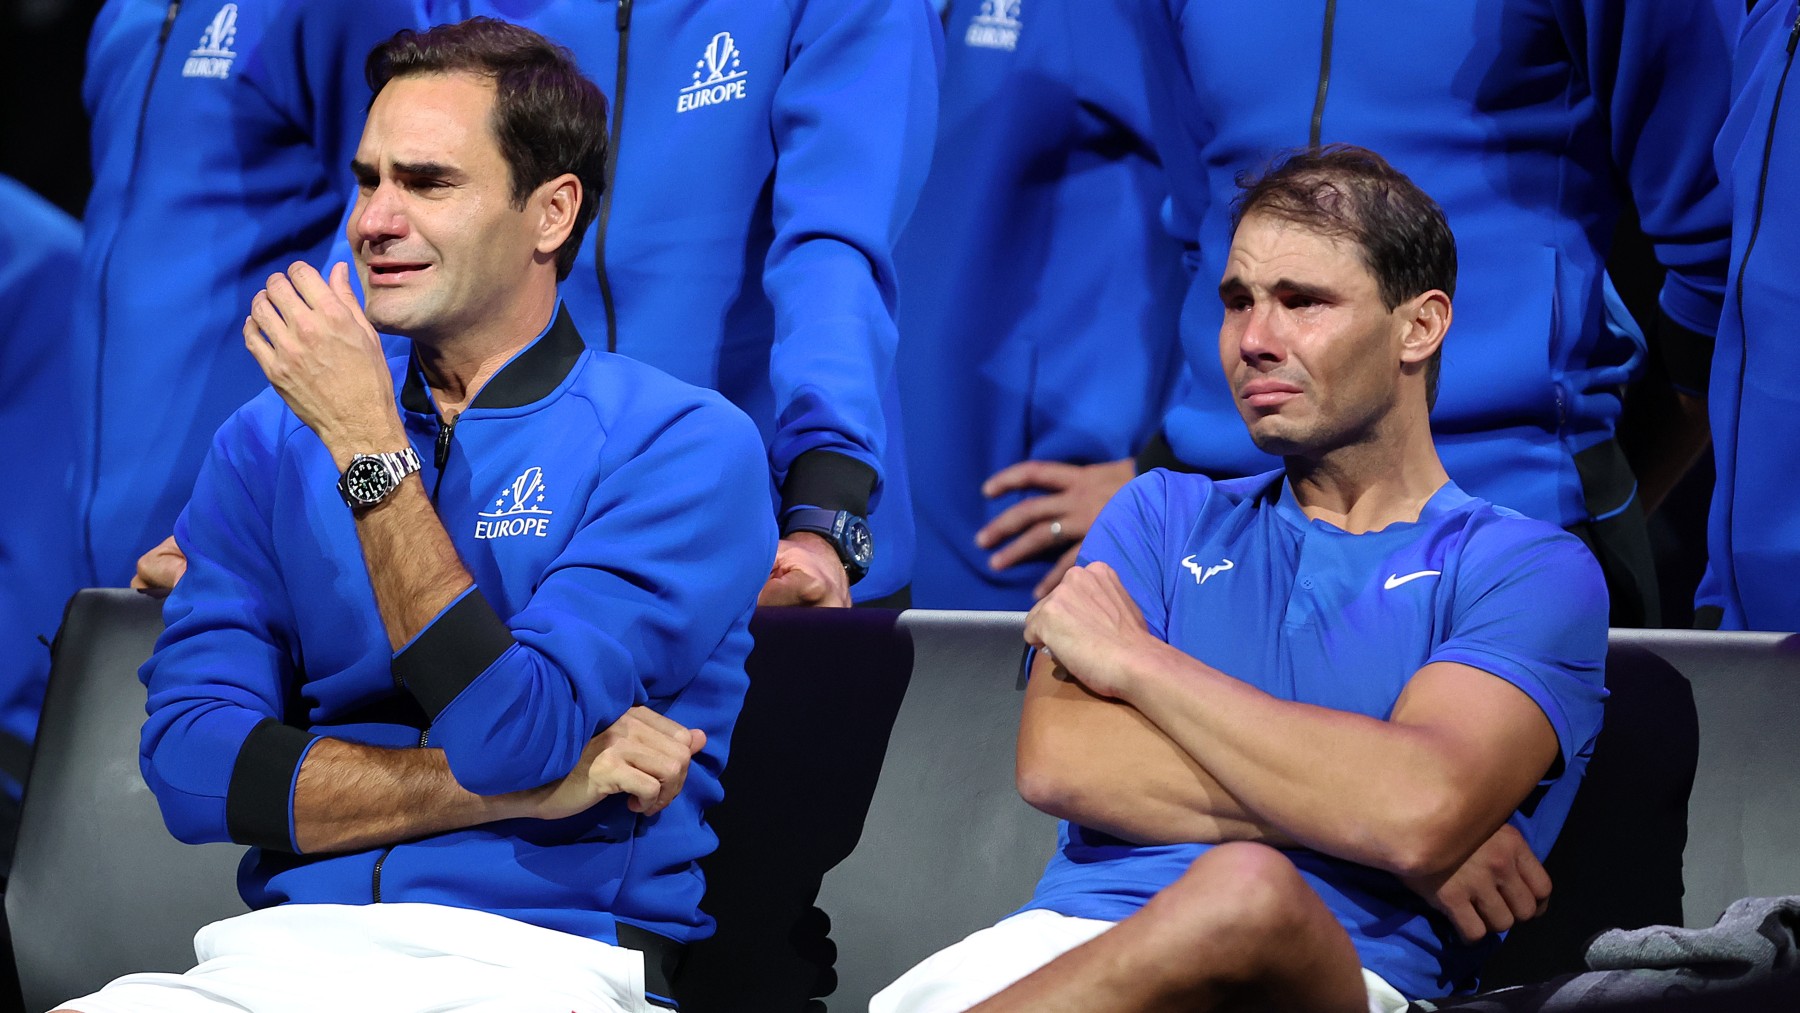 Federer and Nadal’s Surprising Interview at Making Cup